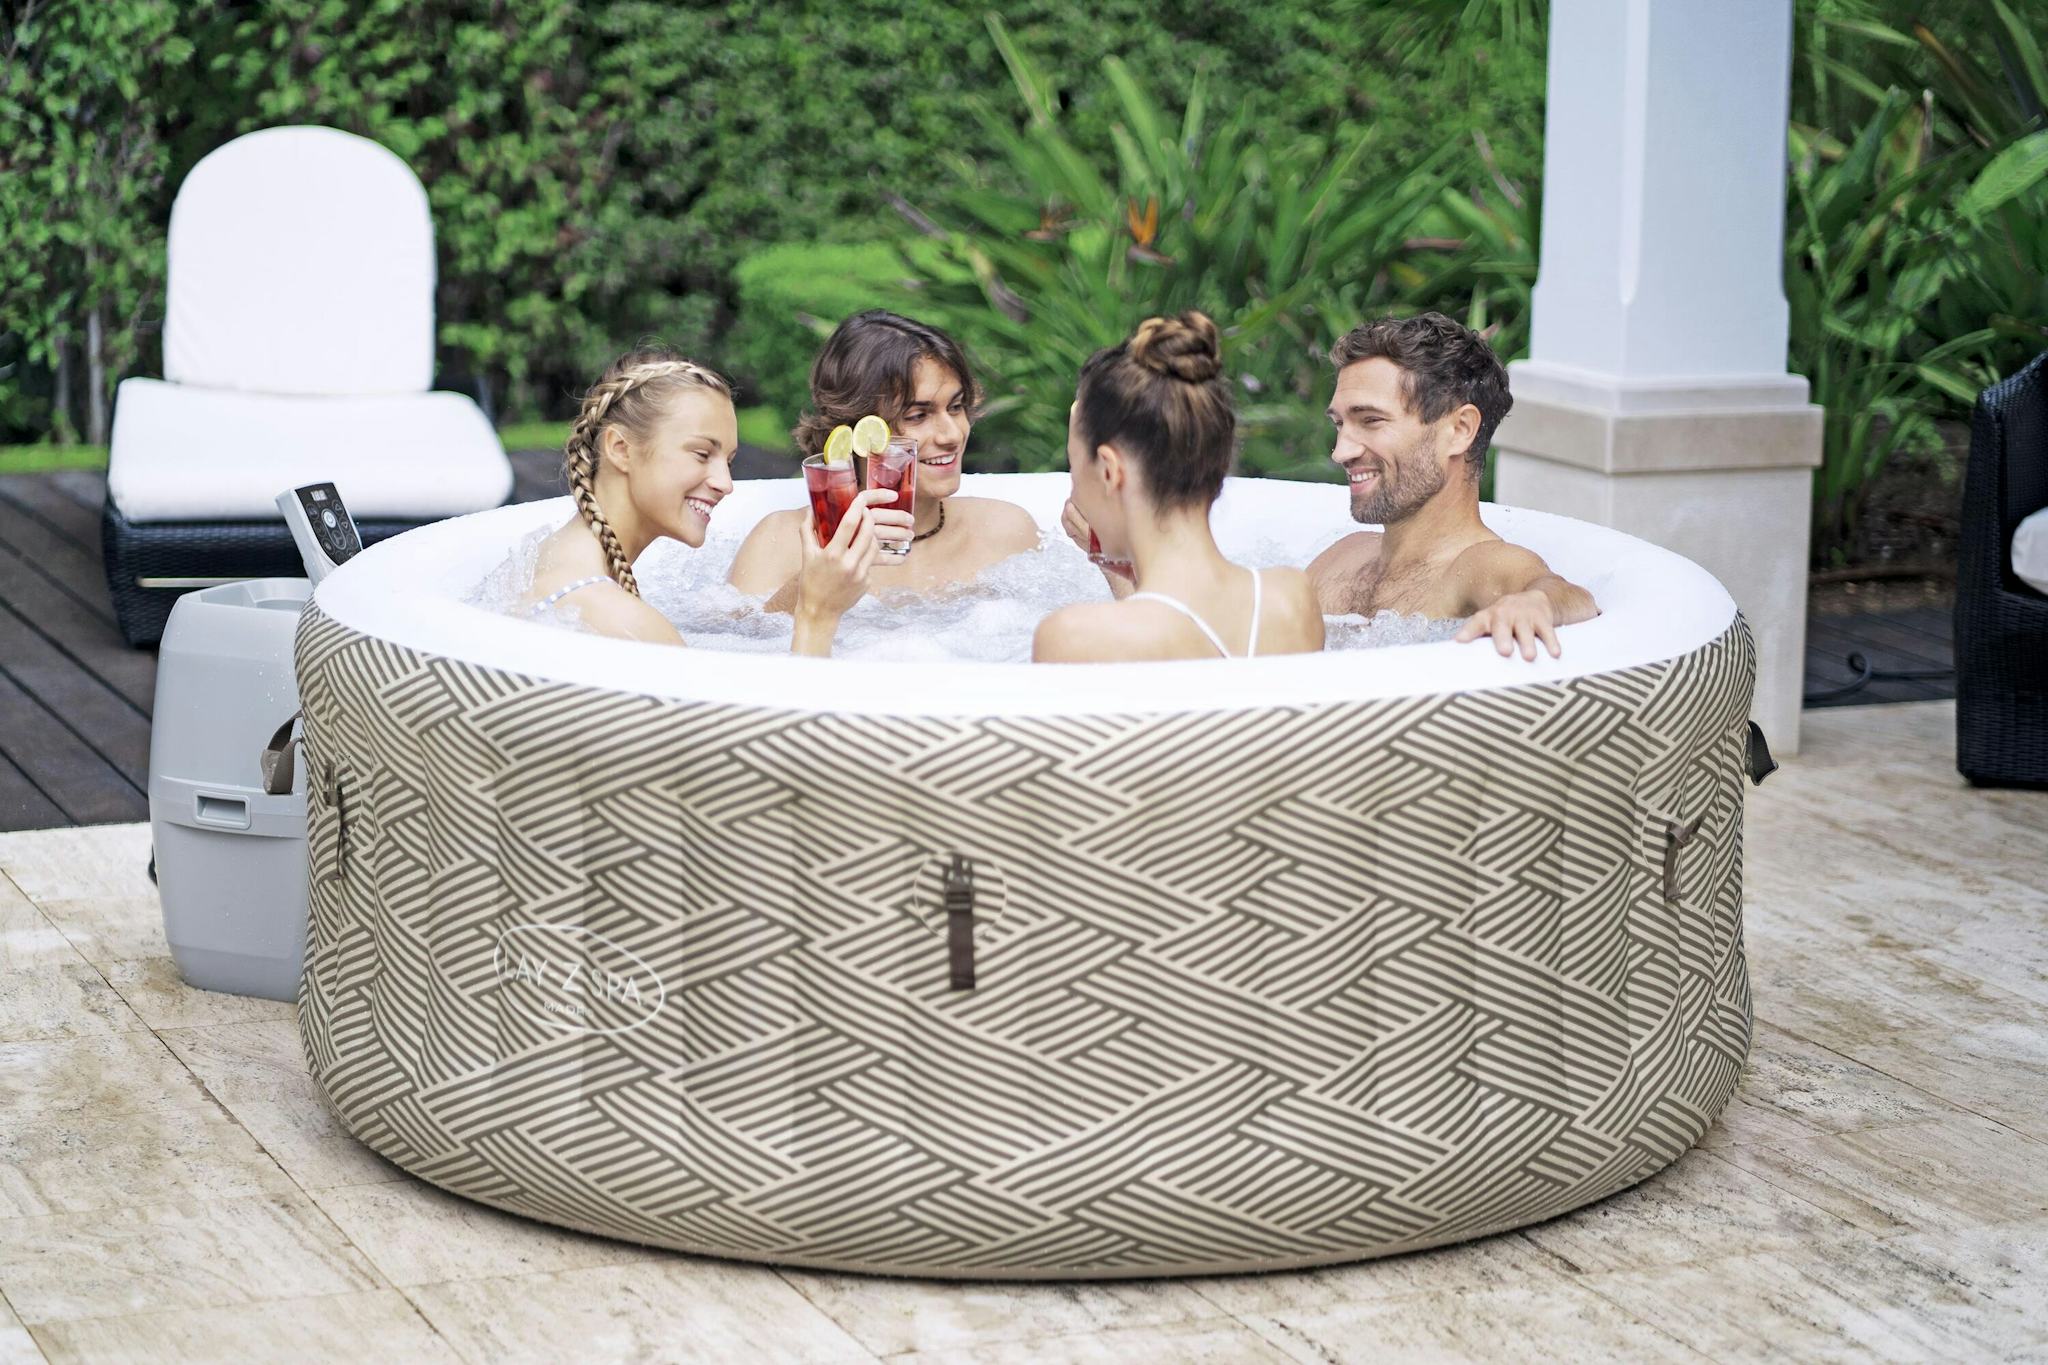 Spas Gonflables Spa gonflable rond Lay-Z-Spa Madrid Airjet™ 2 - 4 personnes Bestway 13